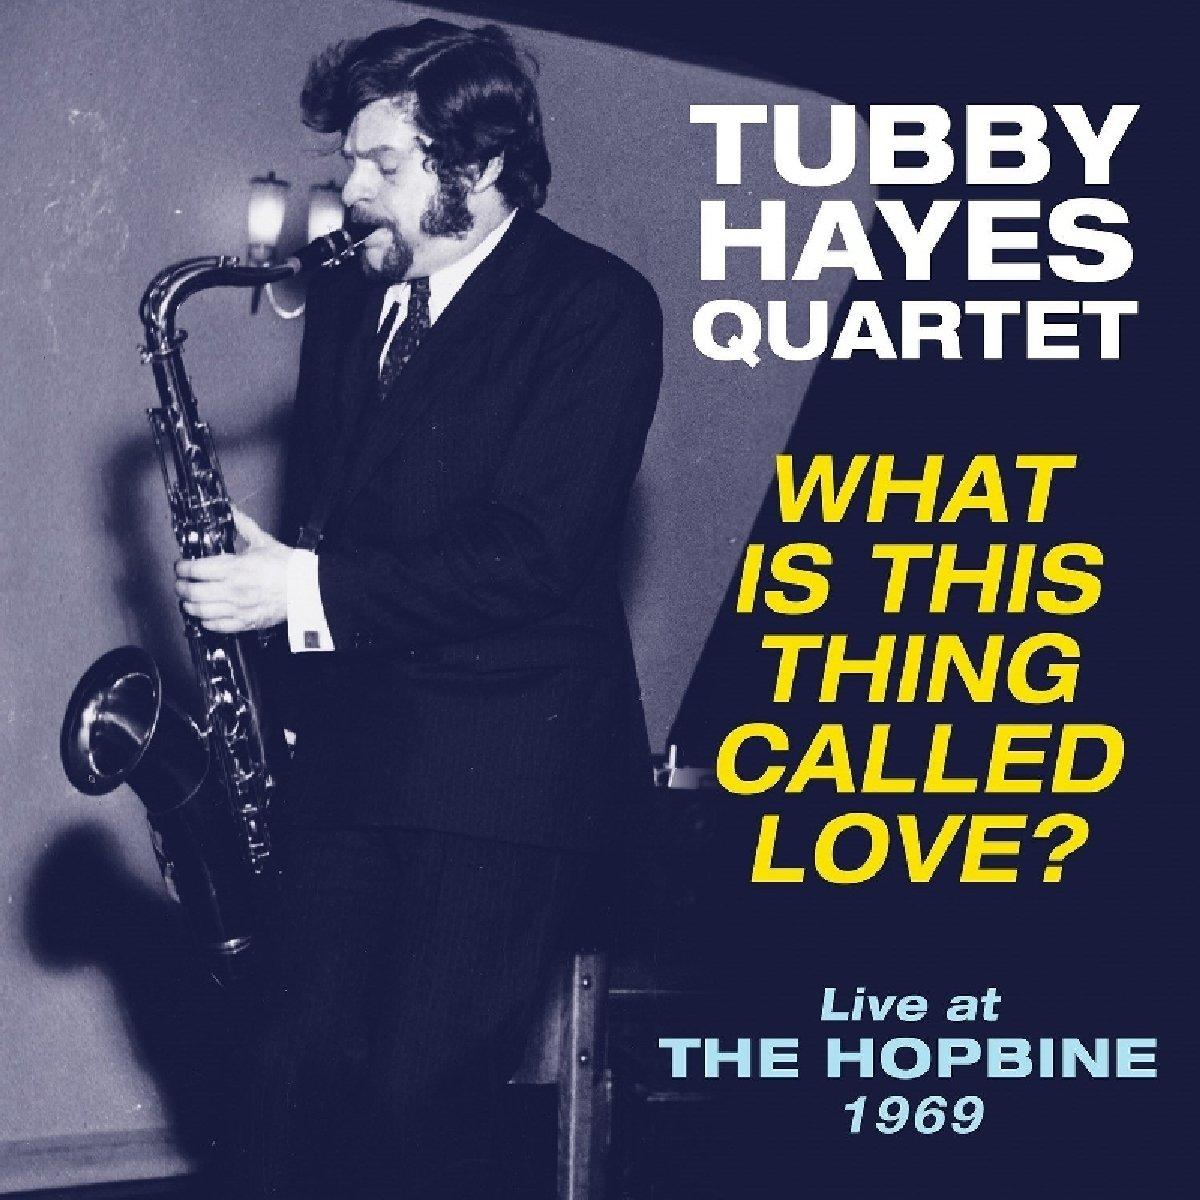 This Hayes Is (Vinyl) What - Love? Quartet Thing Tubby Called -